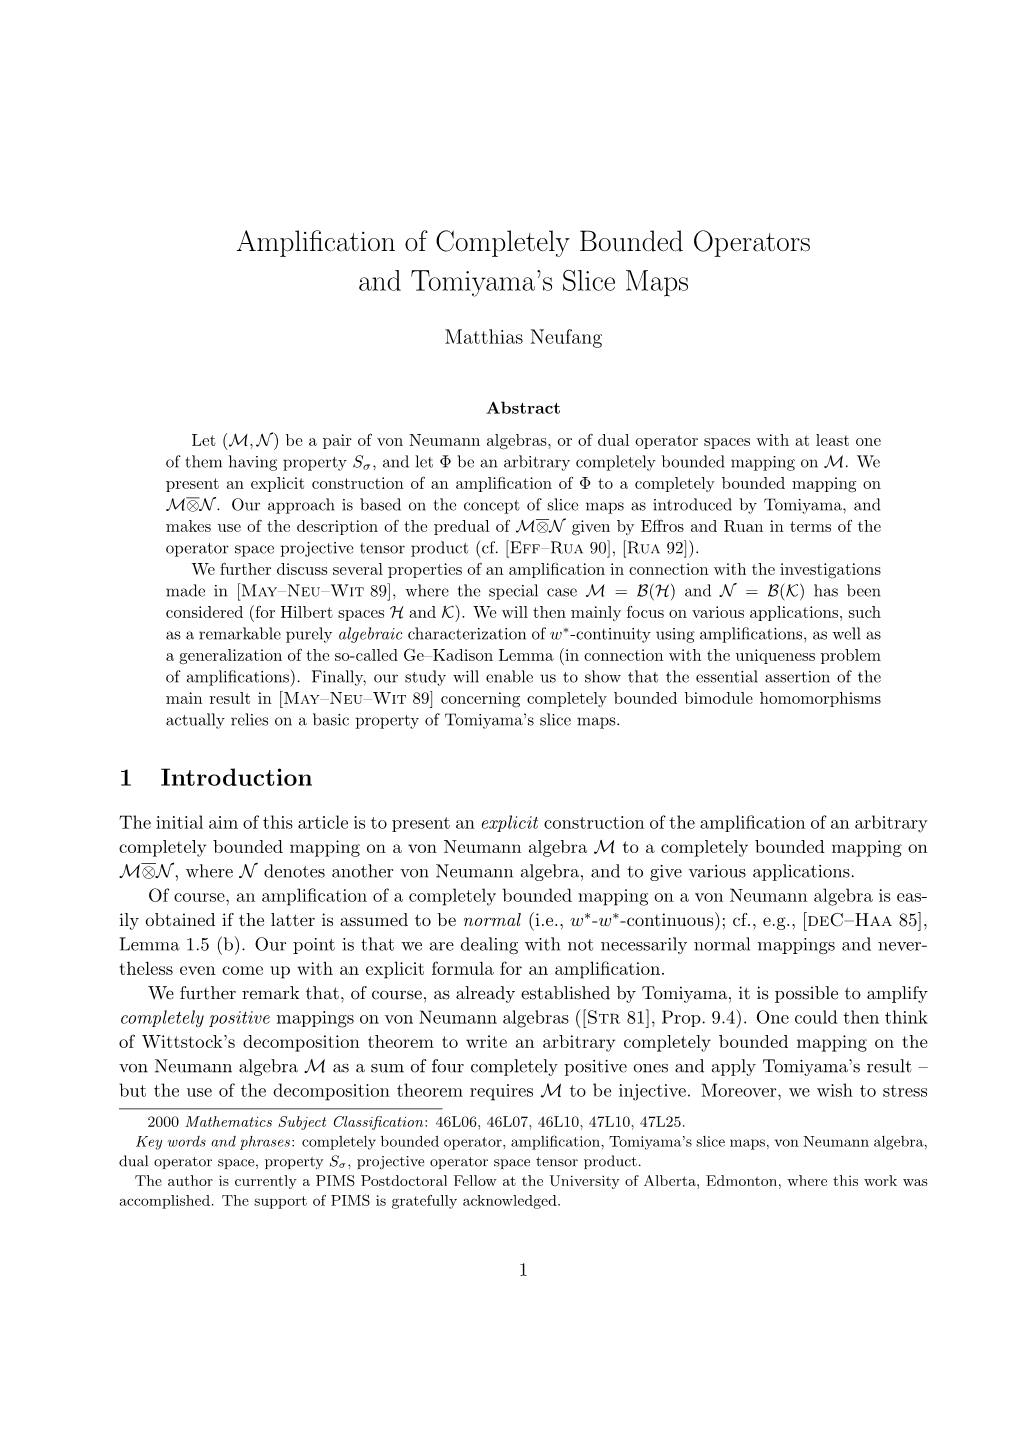 Amplification of Completely Bounded Operators and Tomiyama's Slice